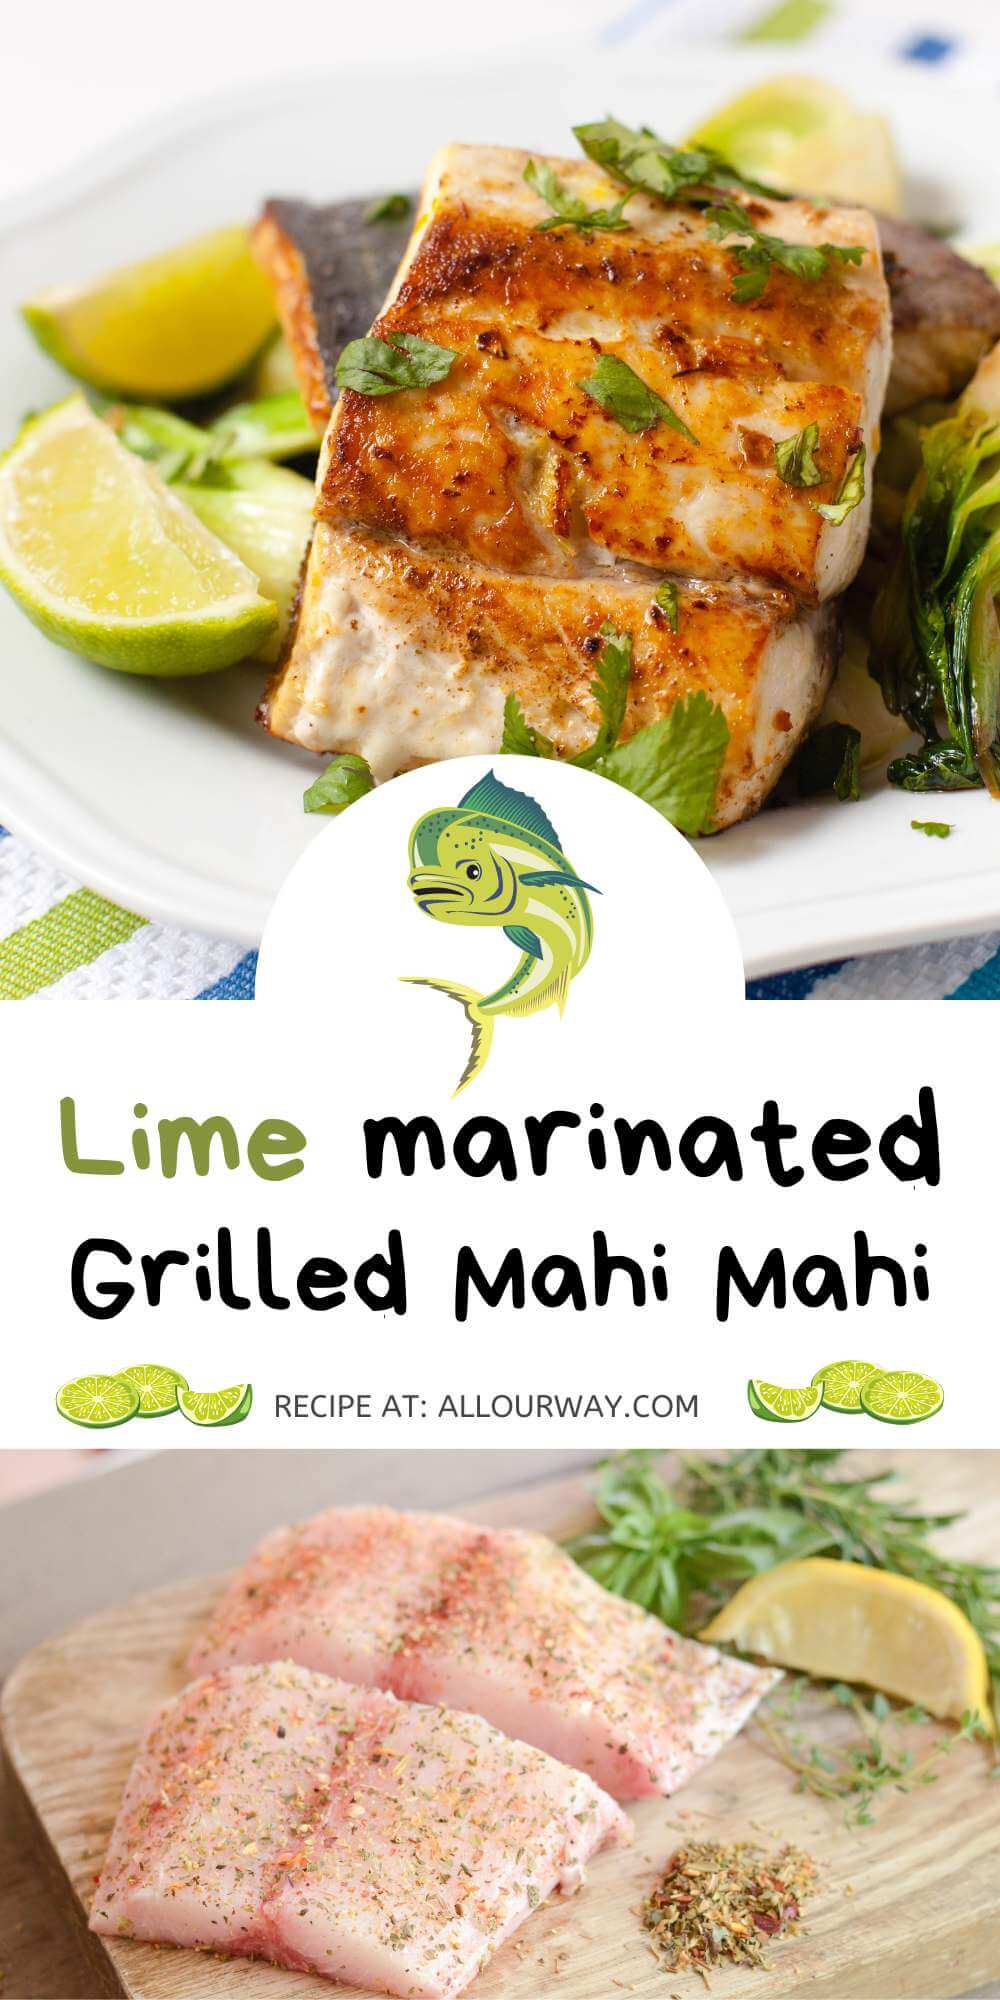 Grilled Lime Marinated Mahi Mahi is mouthwateringly delicious. The fish fillets are first marinated in a tasty lime, soy, ginger marinade and then cook on a very hot grill. The sauce gives a tasty flavor to the fish and keeps it moist. You can also use the marinade on other firm flesh fish.